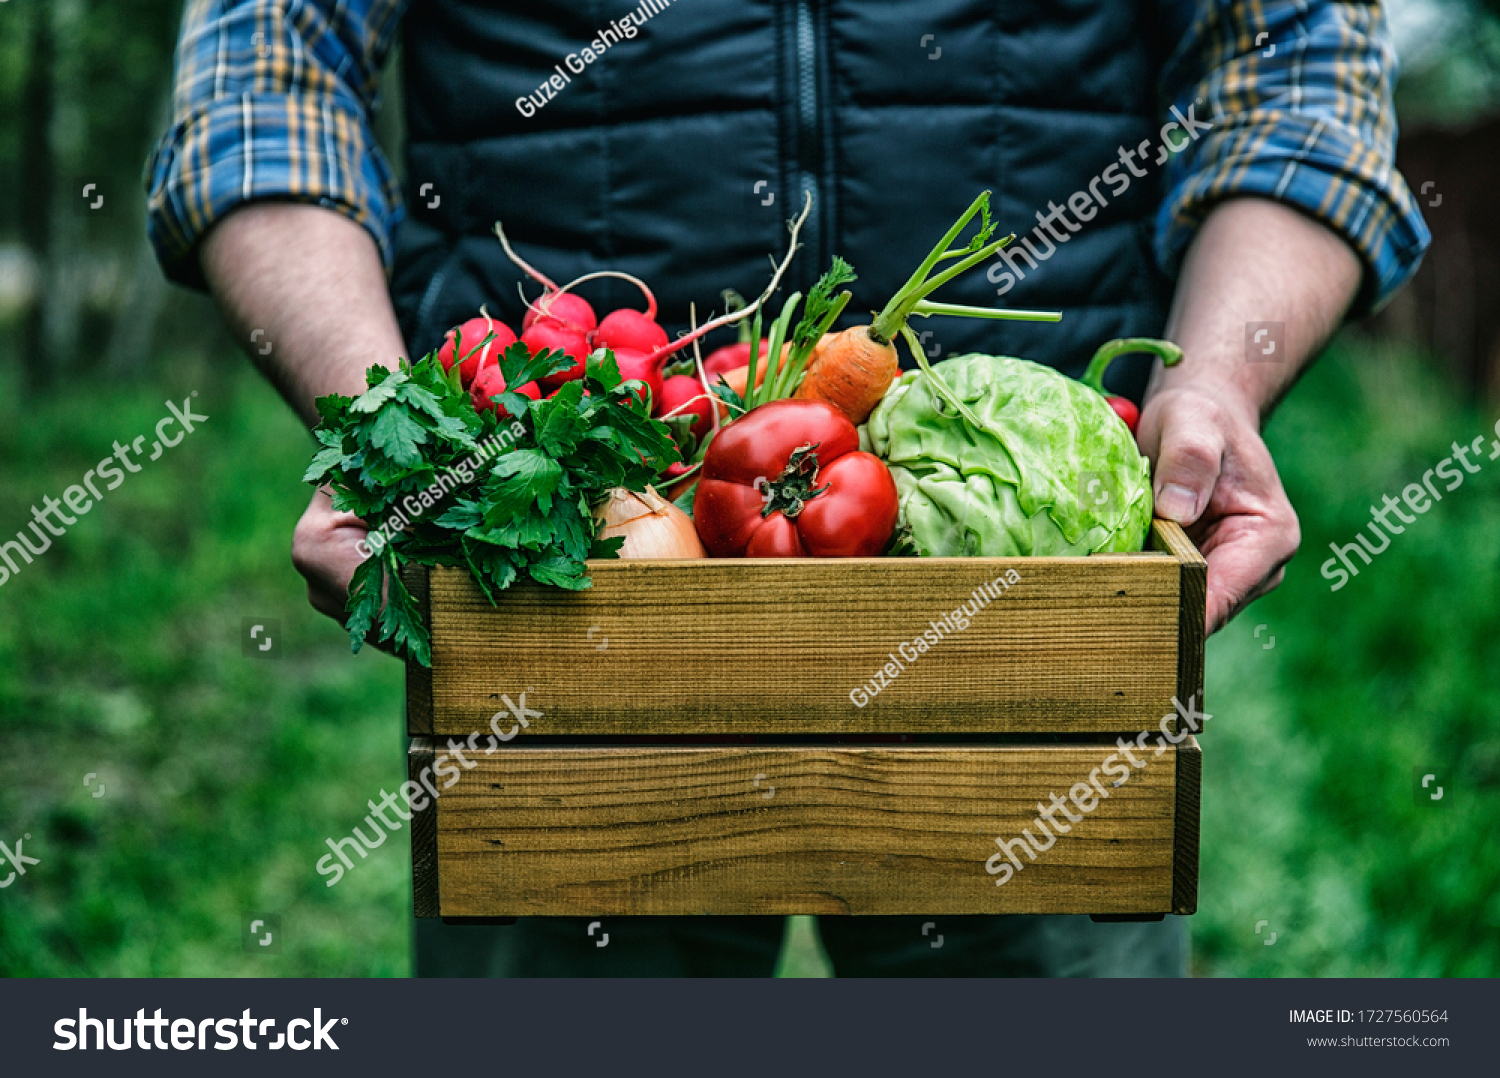 Wooden box with fresh farm vegetables in man's hands outdoors. #1727560564